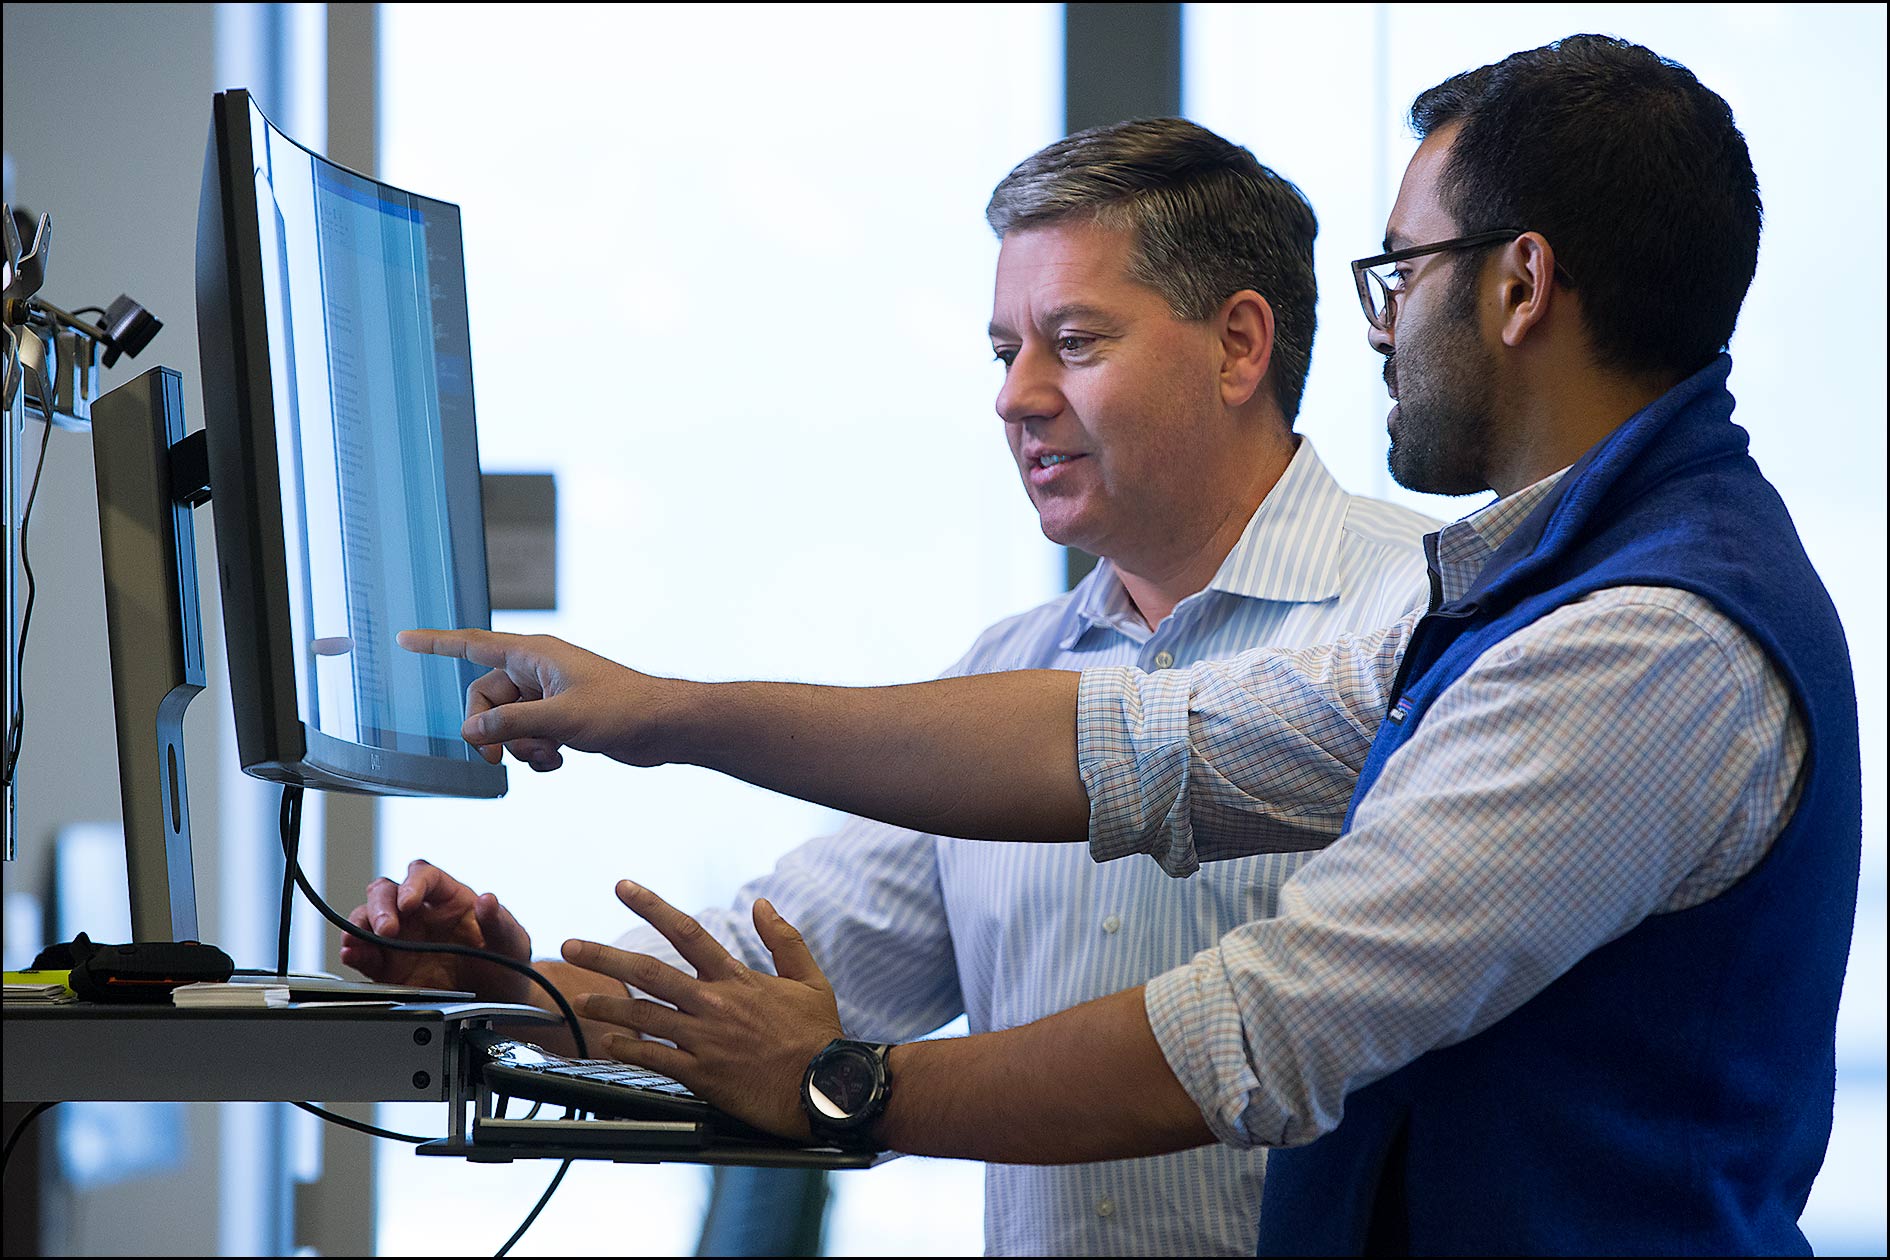 Two employees analyze data at a computer on a standing desk.